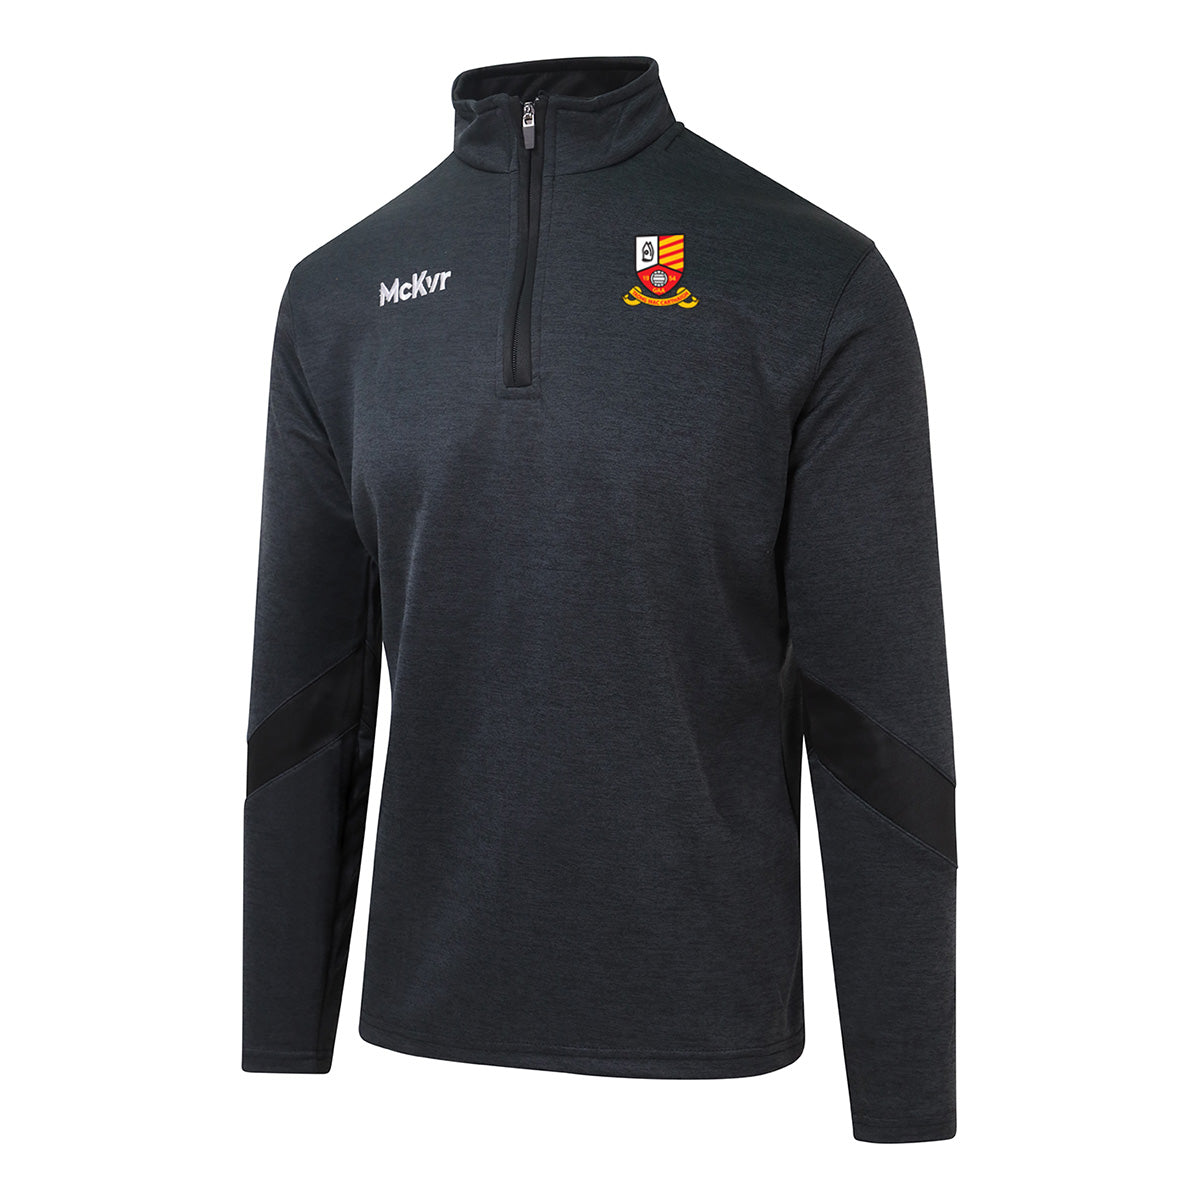 Mc Keever Caheragh Tadgh McCarthy's Core 22 1/4 Zip Top - Youth - Black